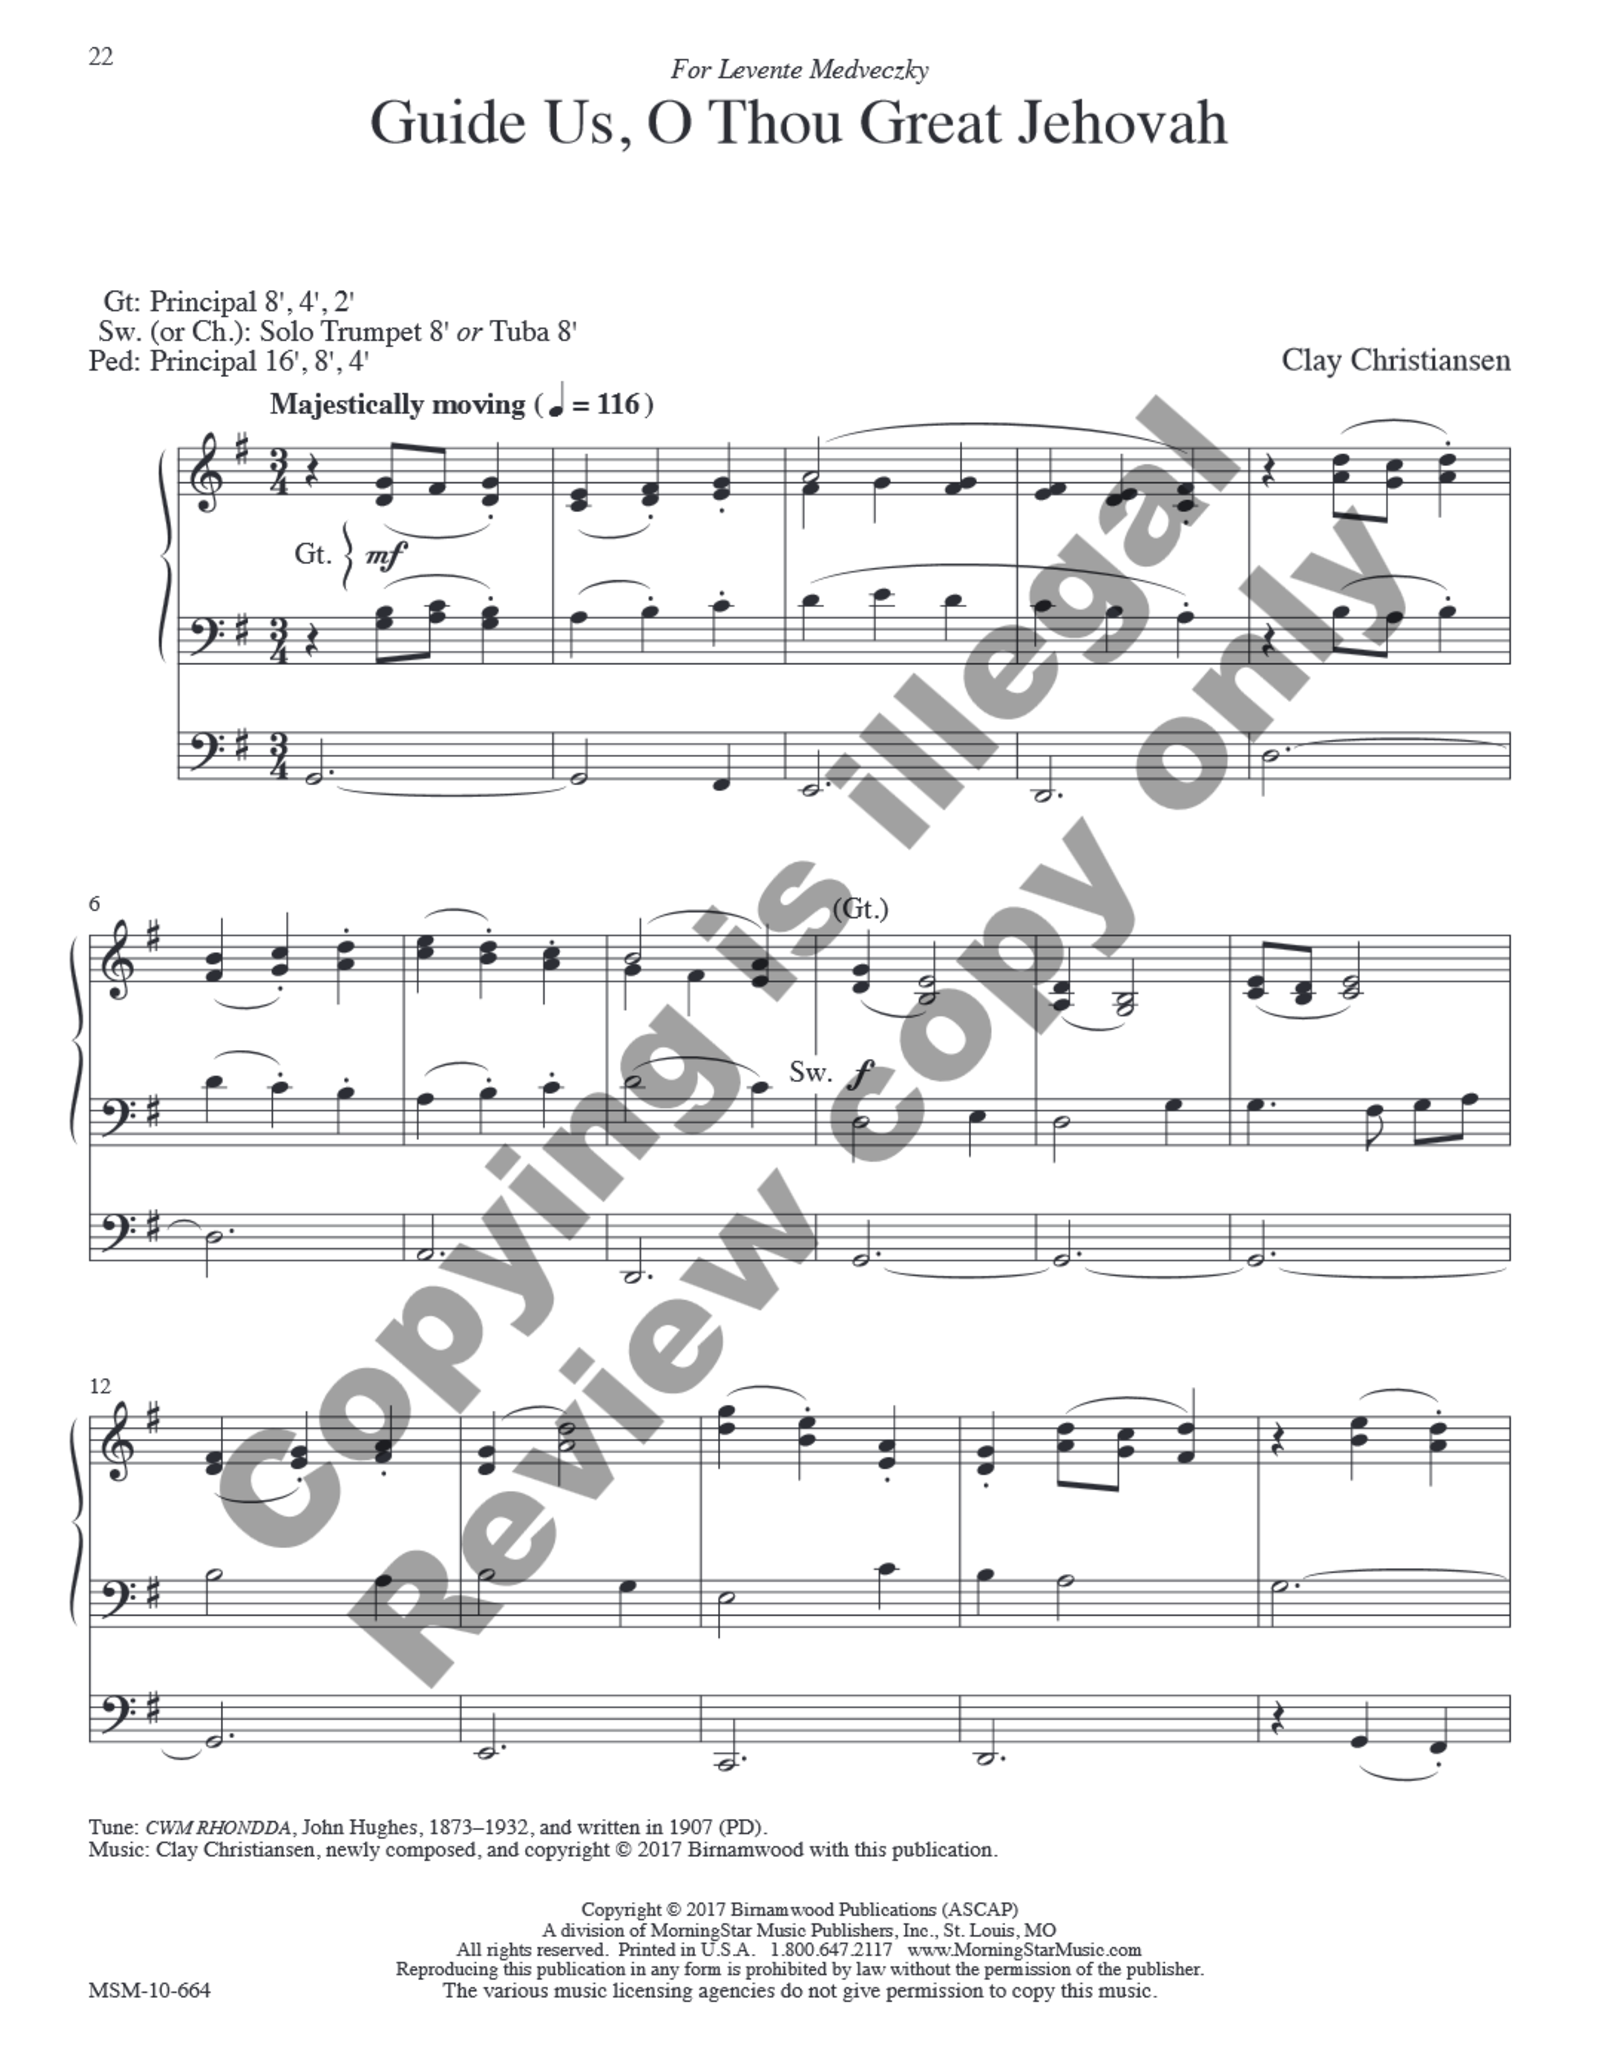 MorningStar All Things Bright and Beautiful: Eight Hymn Settings for Organ By Clay Christiansen